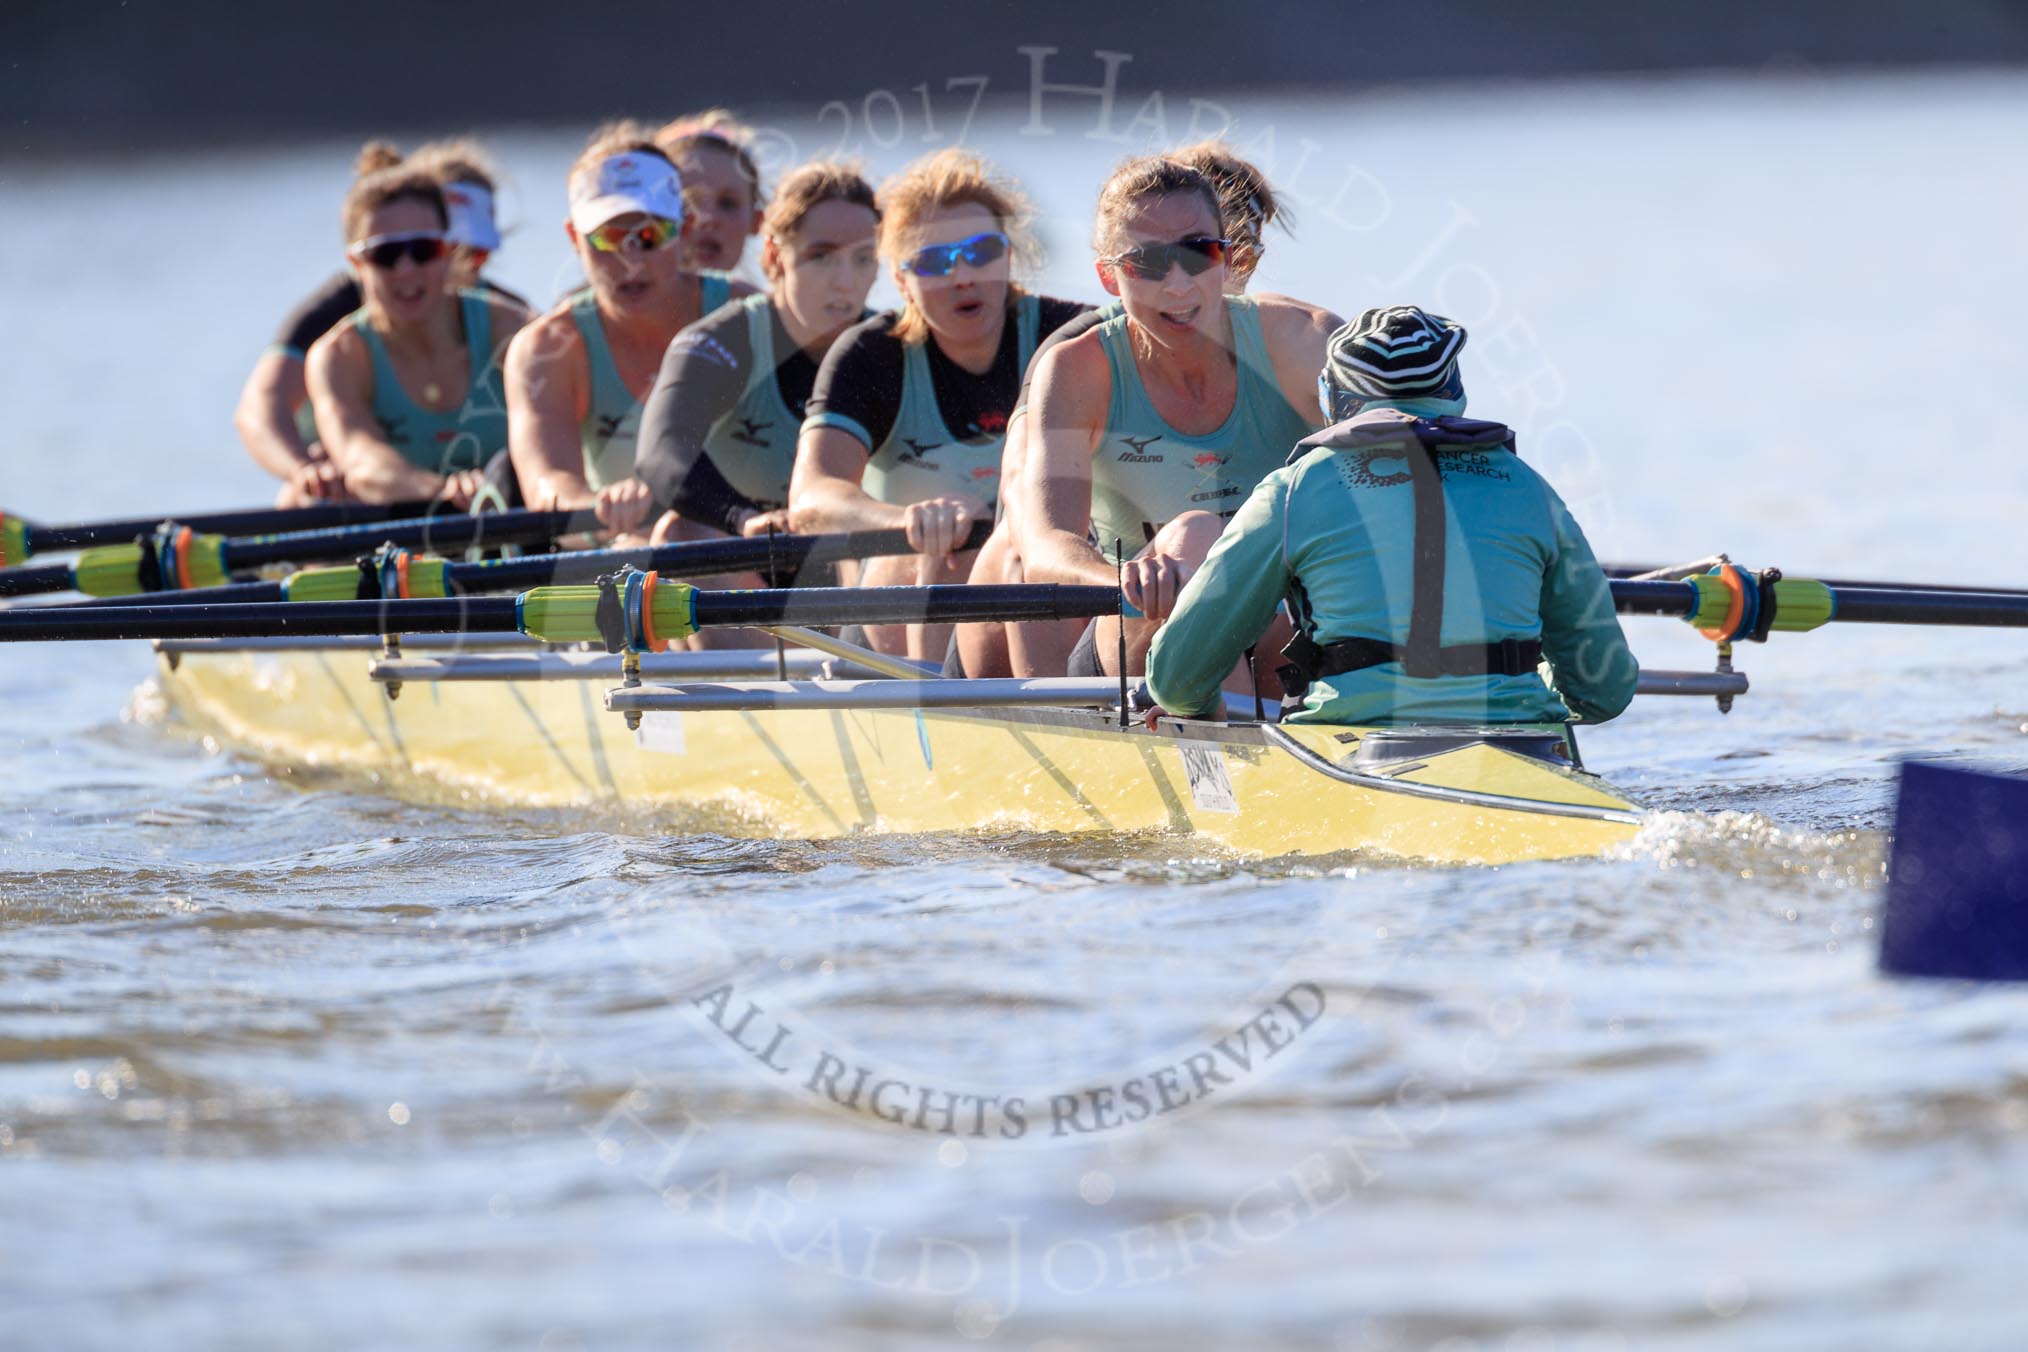 The Women's Boat Race season 2018 - fixture CUWBC vs. ULBC: The CUWBC Eight - here bow Ally French, 2 Robyn Hart-Winks, 3 Fionnuala Gannon, 4 Katherine Barnhill, 5 Hannah Roberts, 6 Oonagh Cousins, 7 Imogen Grant, stroke Tricia Smith, cox Sophie Shapter.
River Thames between Putney Bridge and Mortlake,
London SW15,

United Kingdom,
on 17 February 2018 at 13:32, image #147